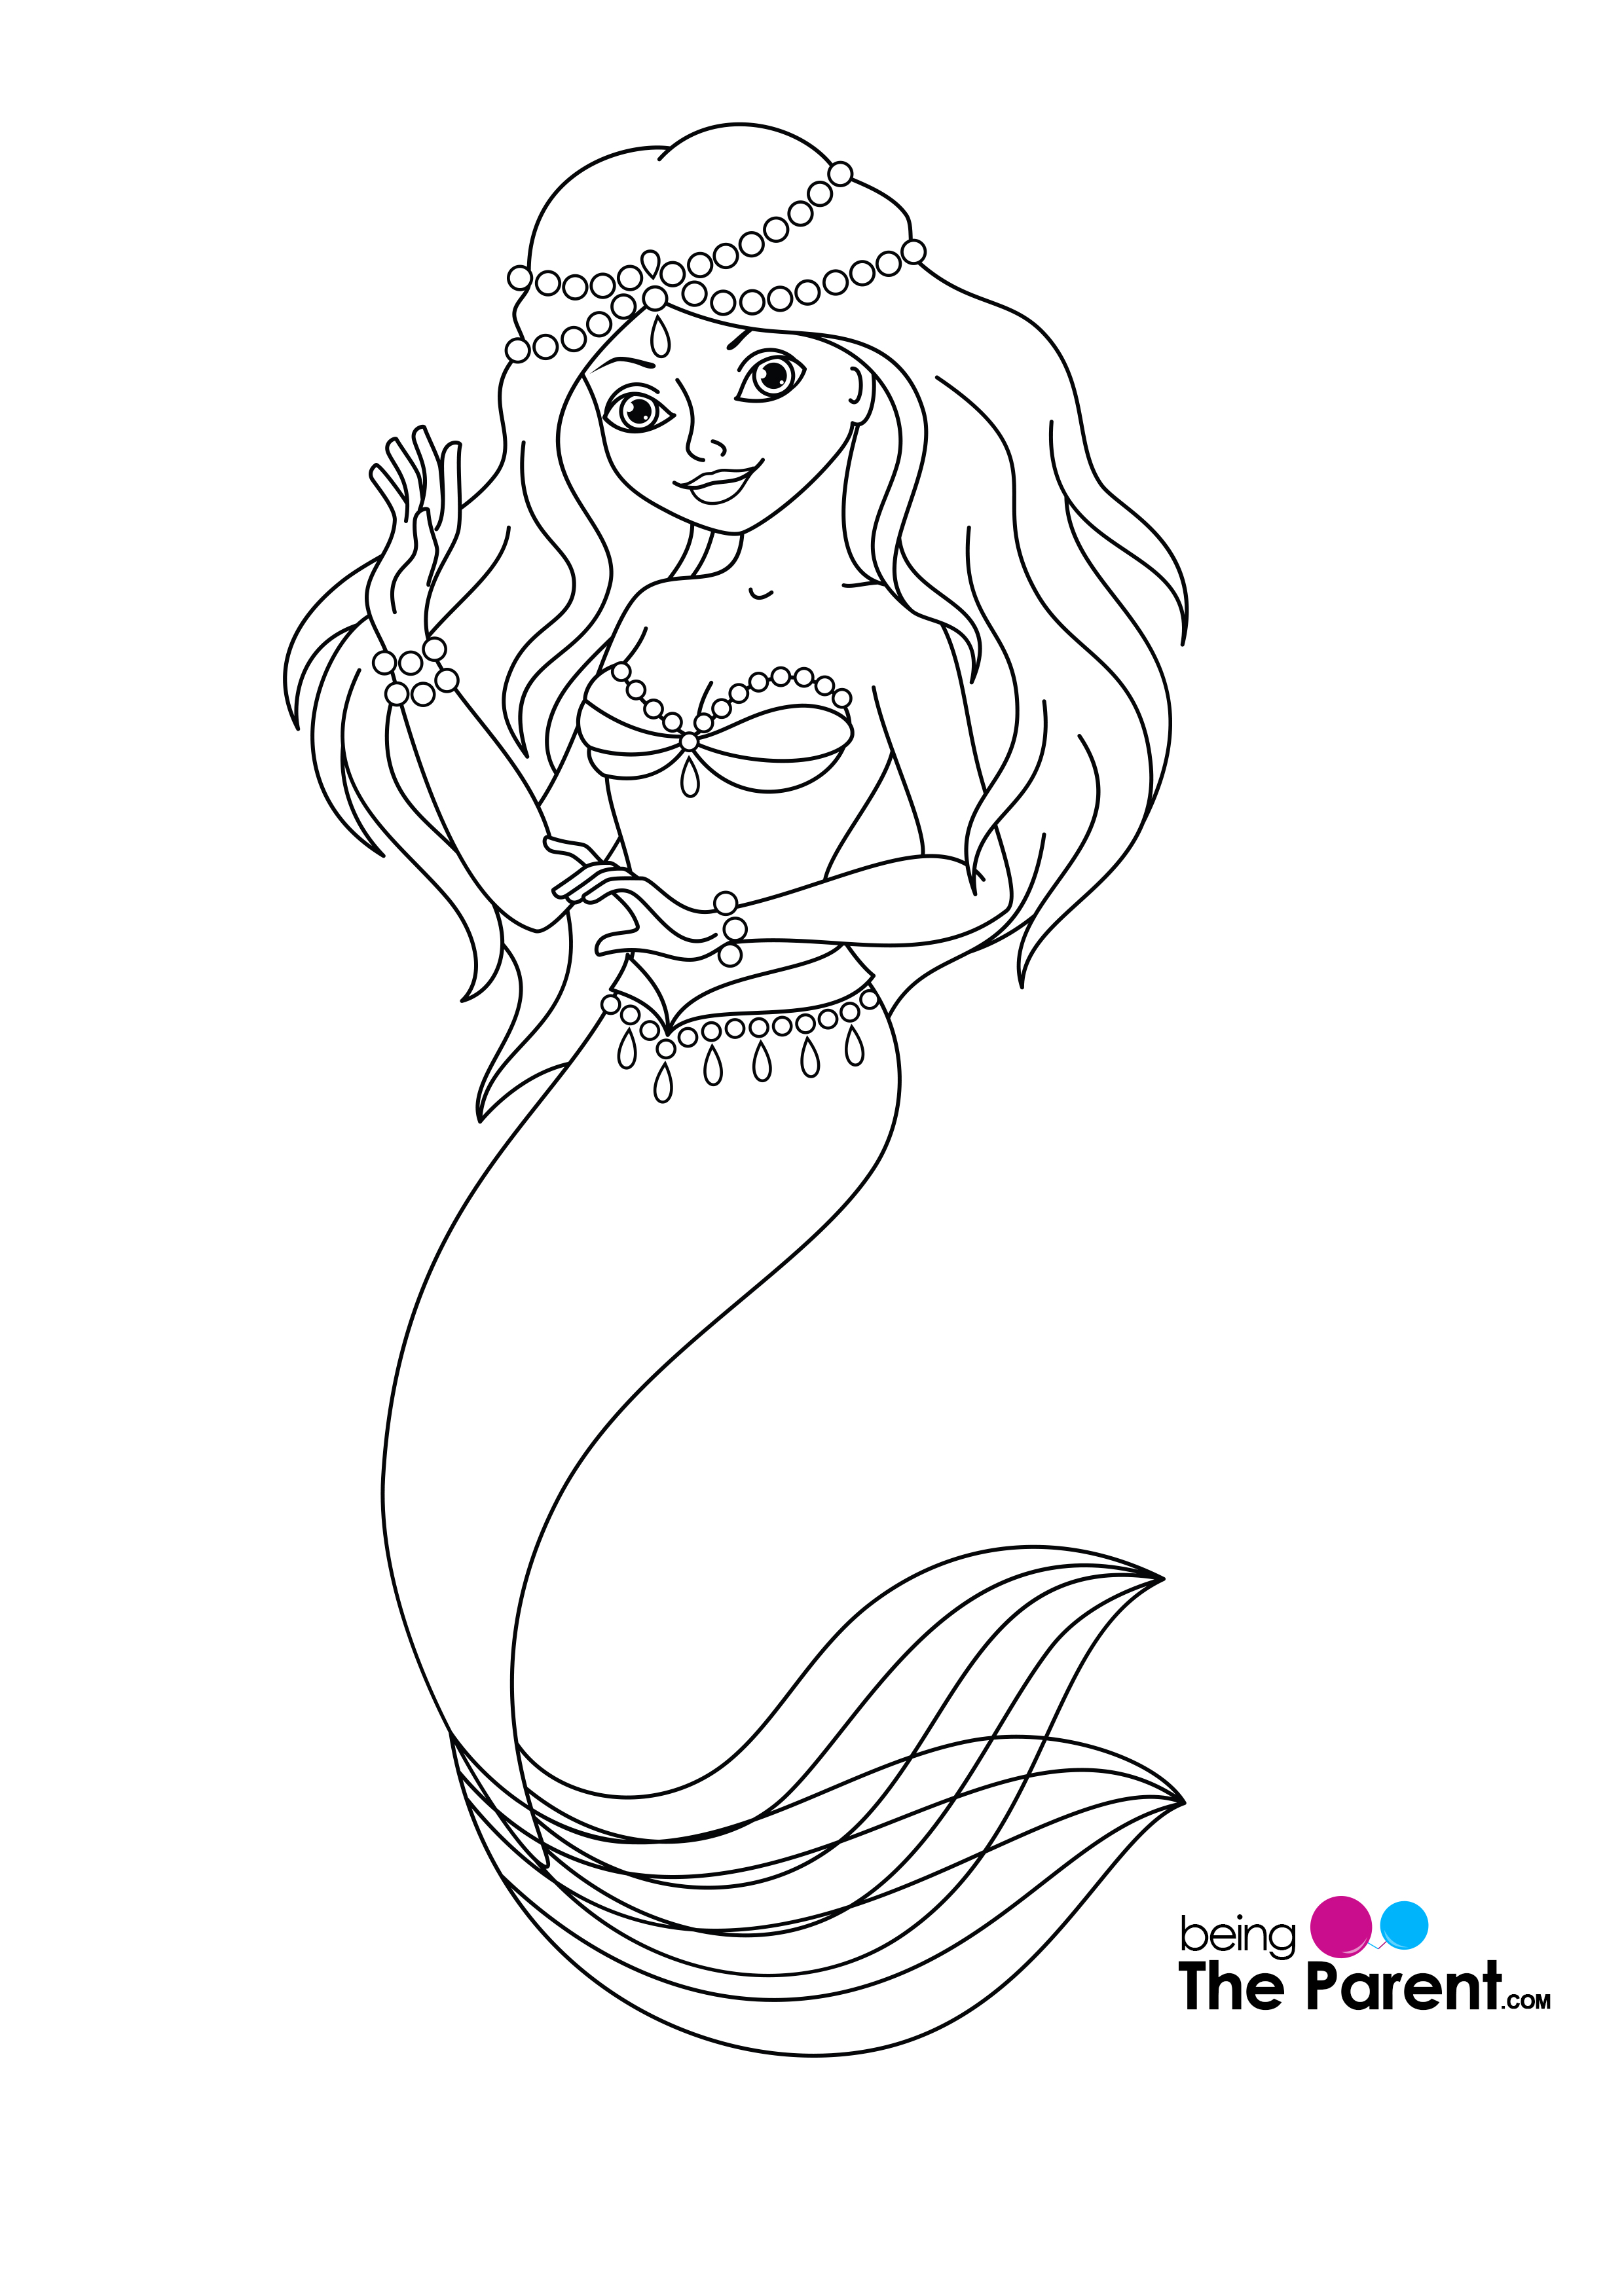 Mermaid Valentine Coloring Pages Coloring Pages